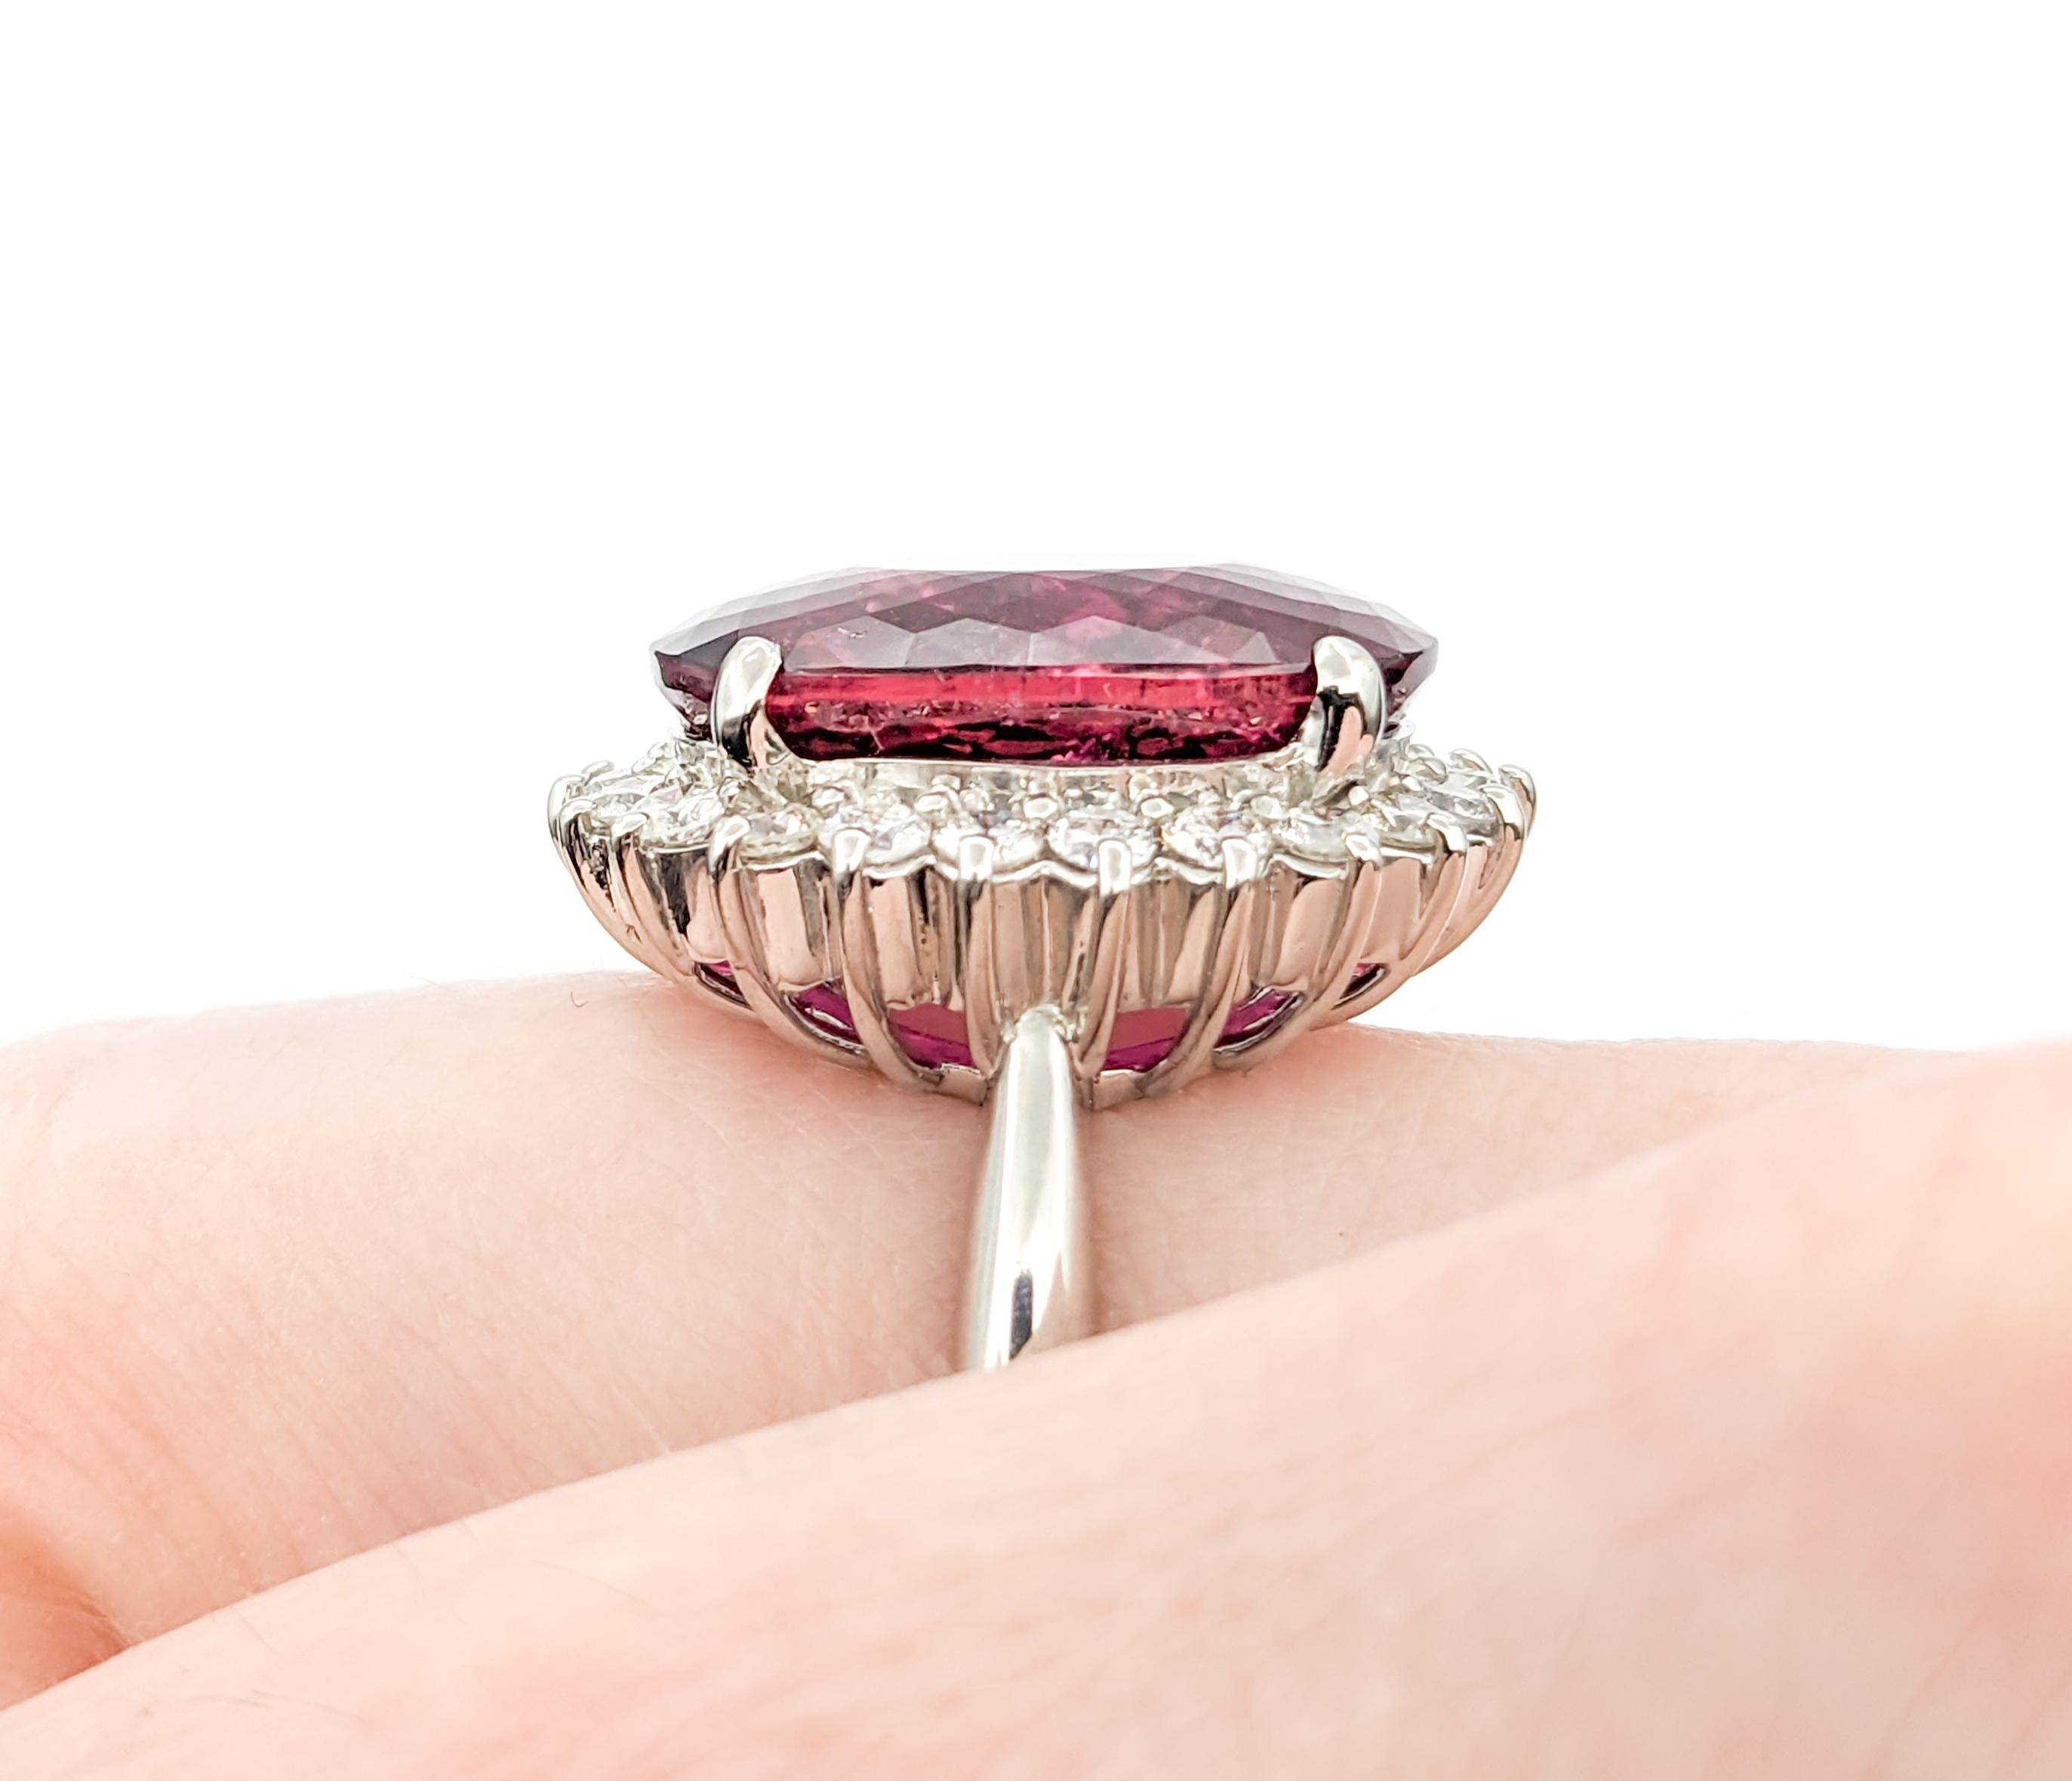 GIA Cocktail 11.40ct Rubellite Tourmaline & .88ctw Diamond Ring In Platinum


This exquisite Gemstone Fashion Ring, meticulously crafted in 900pt platinum, showcases a stunning 11.40ct Rubellite Tourmaline centerpiece, enveloped by a .88ctw diamond